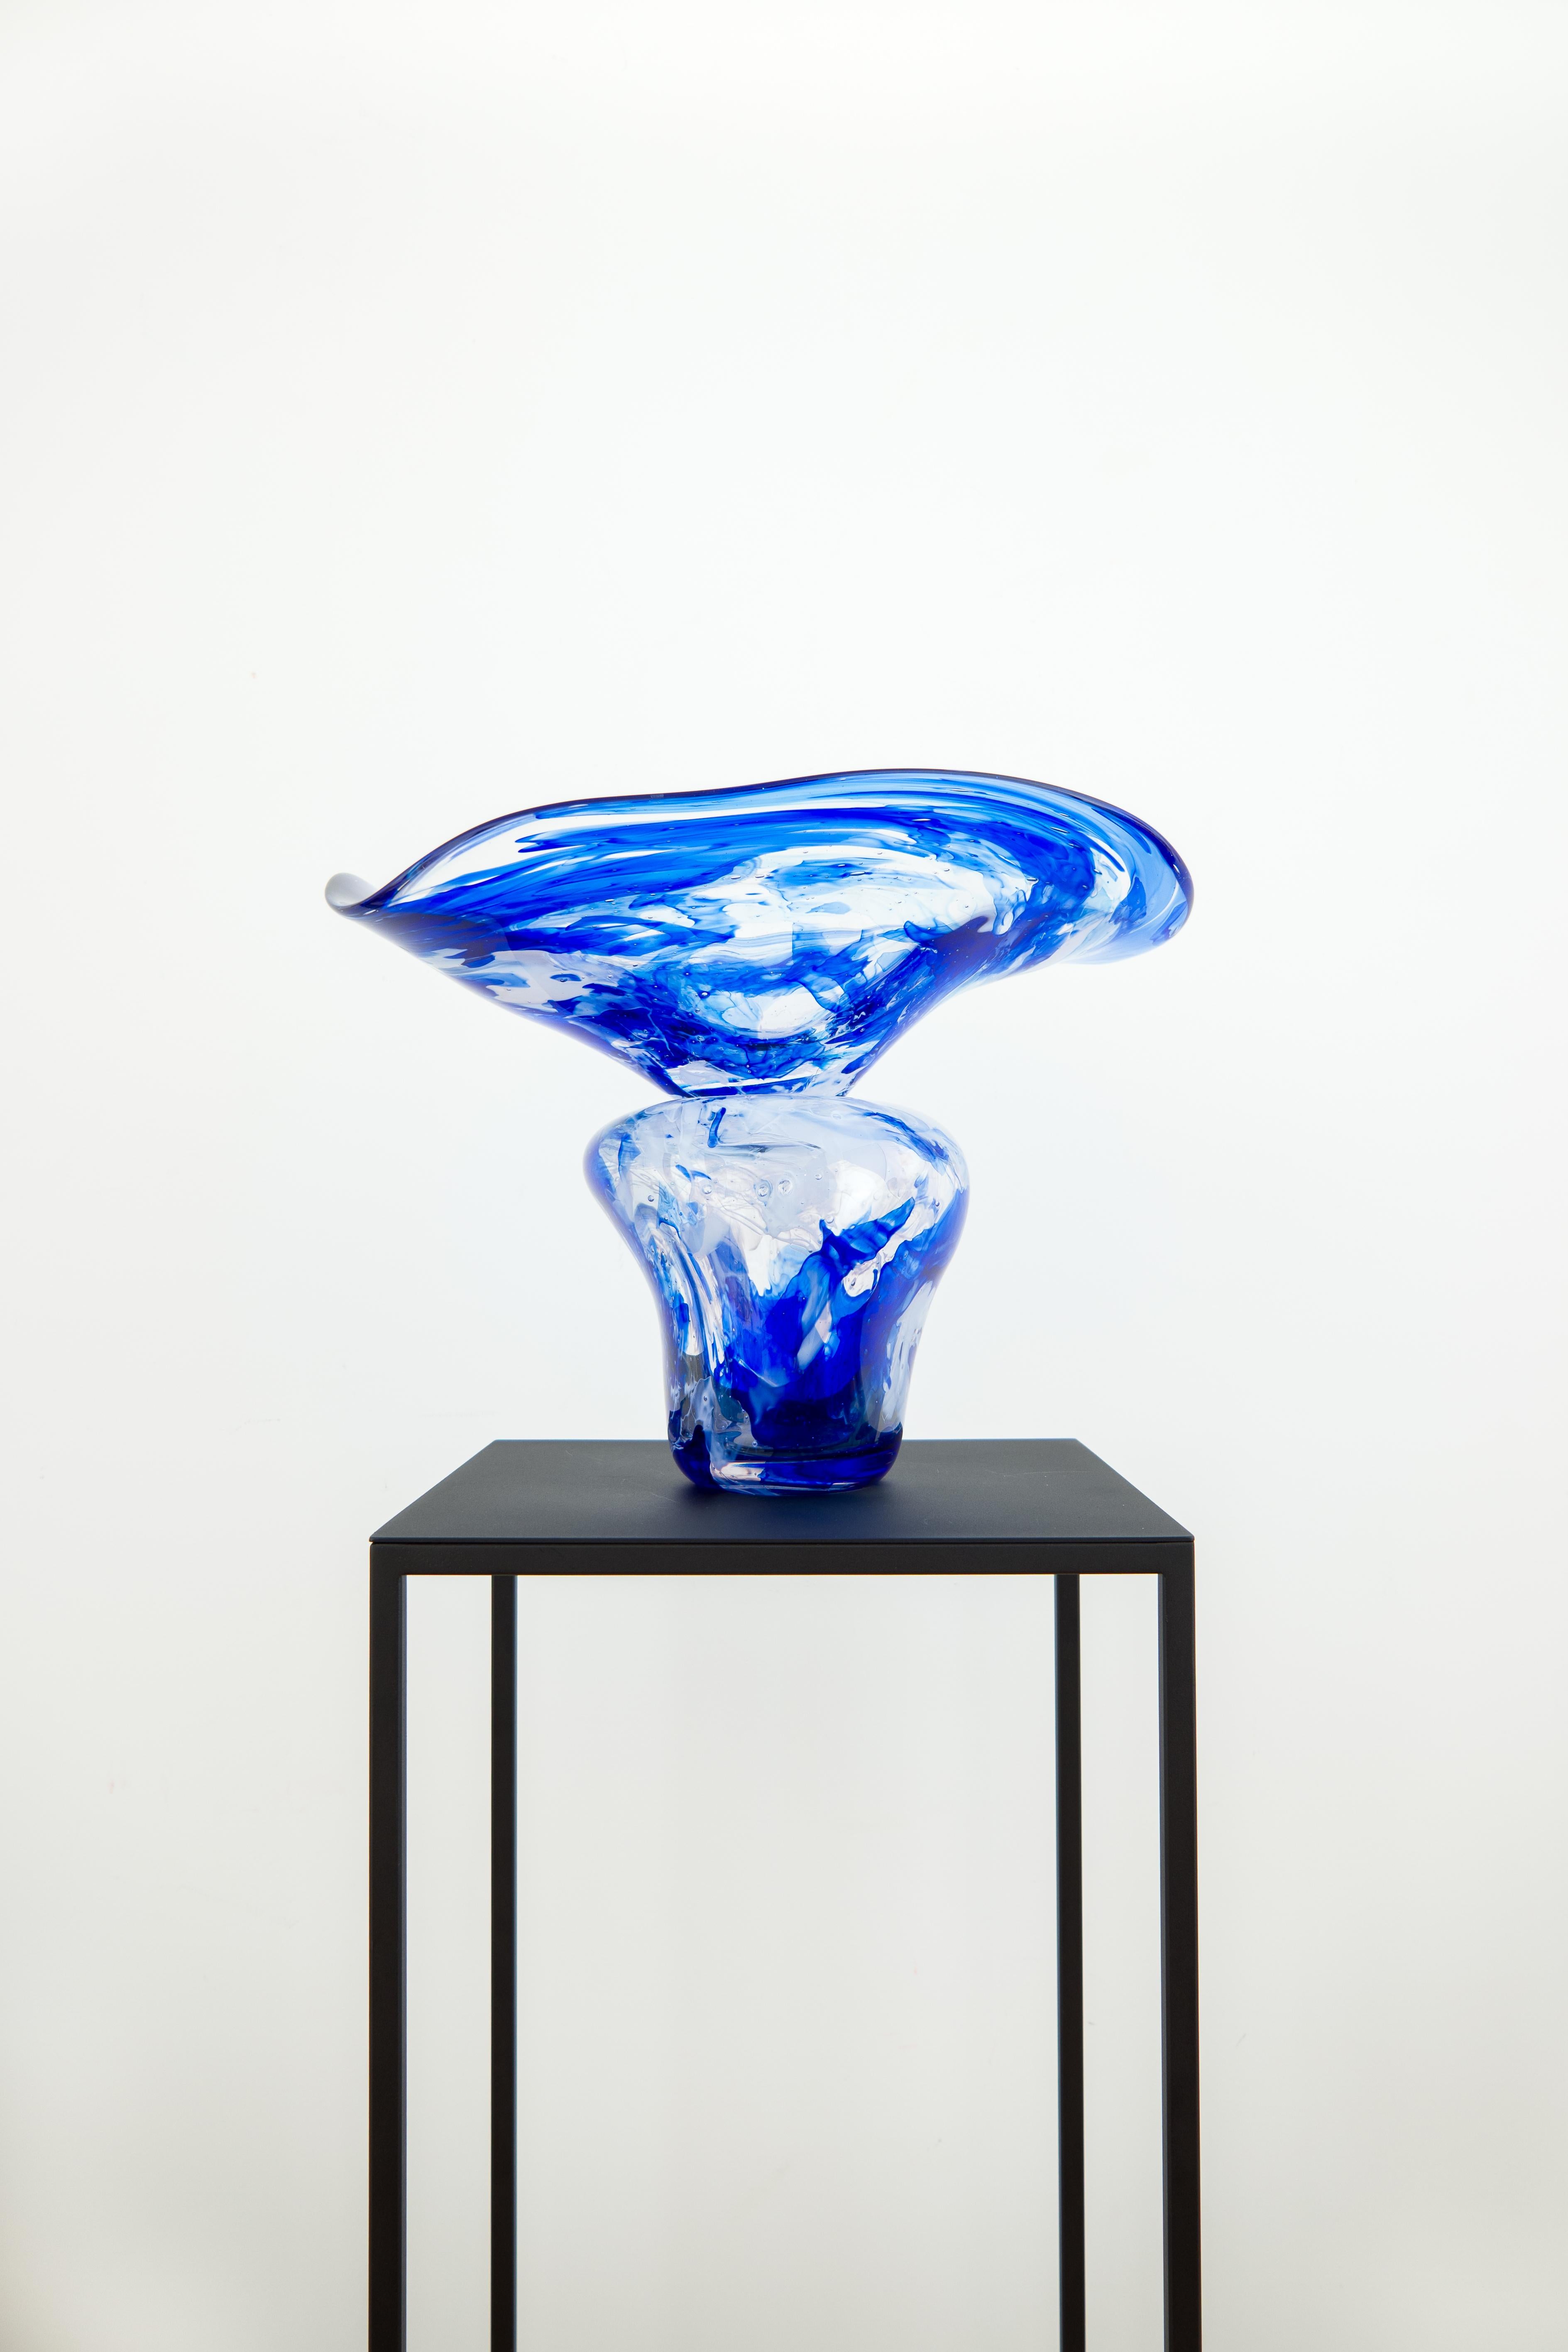 See The Rise, Feel The Sun Glass Sculpture by Eline Martherus
Dimensions:  
Bowl D 48.5 x H 36 cm
Vase D 50 x H 33.5 cm
Rock D 16.5 x H 13.5 cm
Materials: Glass

Reference to the infinity of the cycle of the sun.
‍
An ode to nature, combined